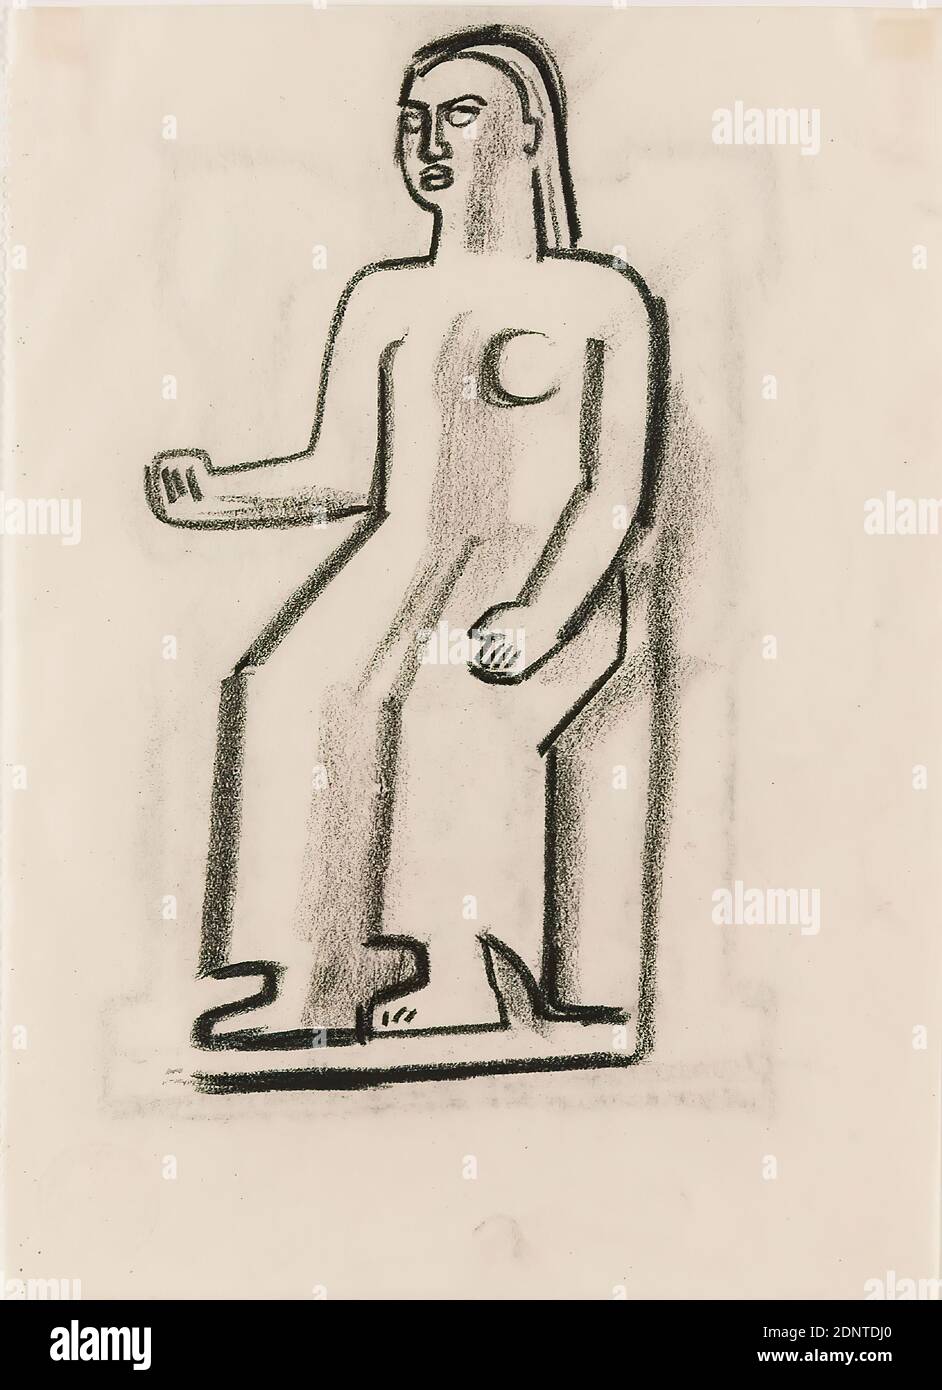 Gustav Heinrich Wolff, Sitting, parchment, drawing charcoal, drawing, charcoal on parchment, total: height: 21.8 cm; width: 15.8 cm, sketches, sitting figure, Classic Modernism, sitting in half profile to the right, right arm raised and angled. Study/variant of the throne ends. Single sheet from sketchbook 1923 Stock Photo